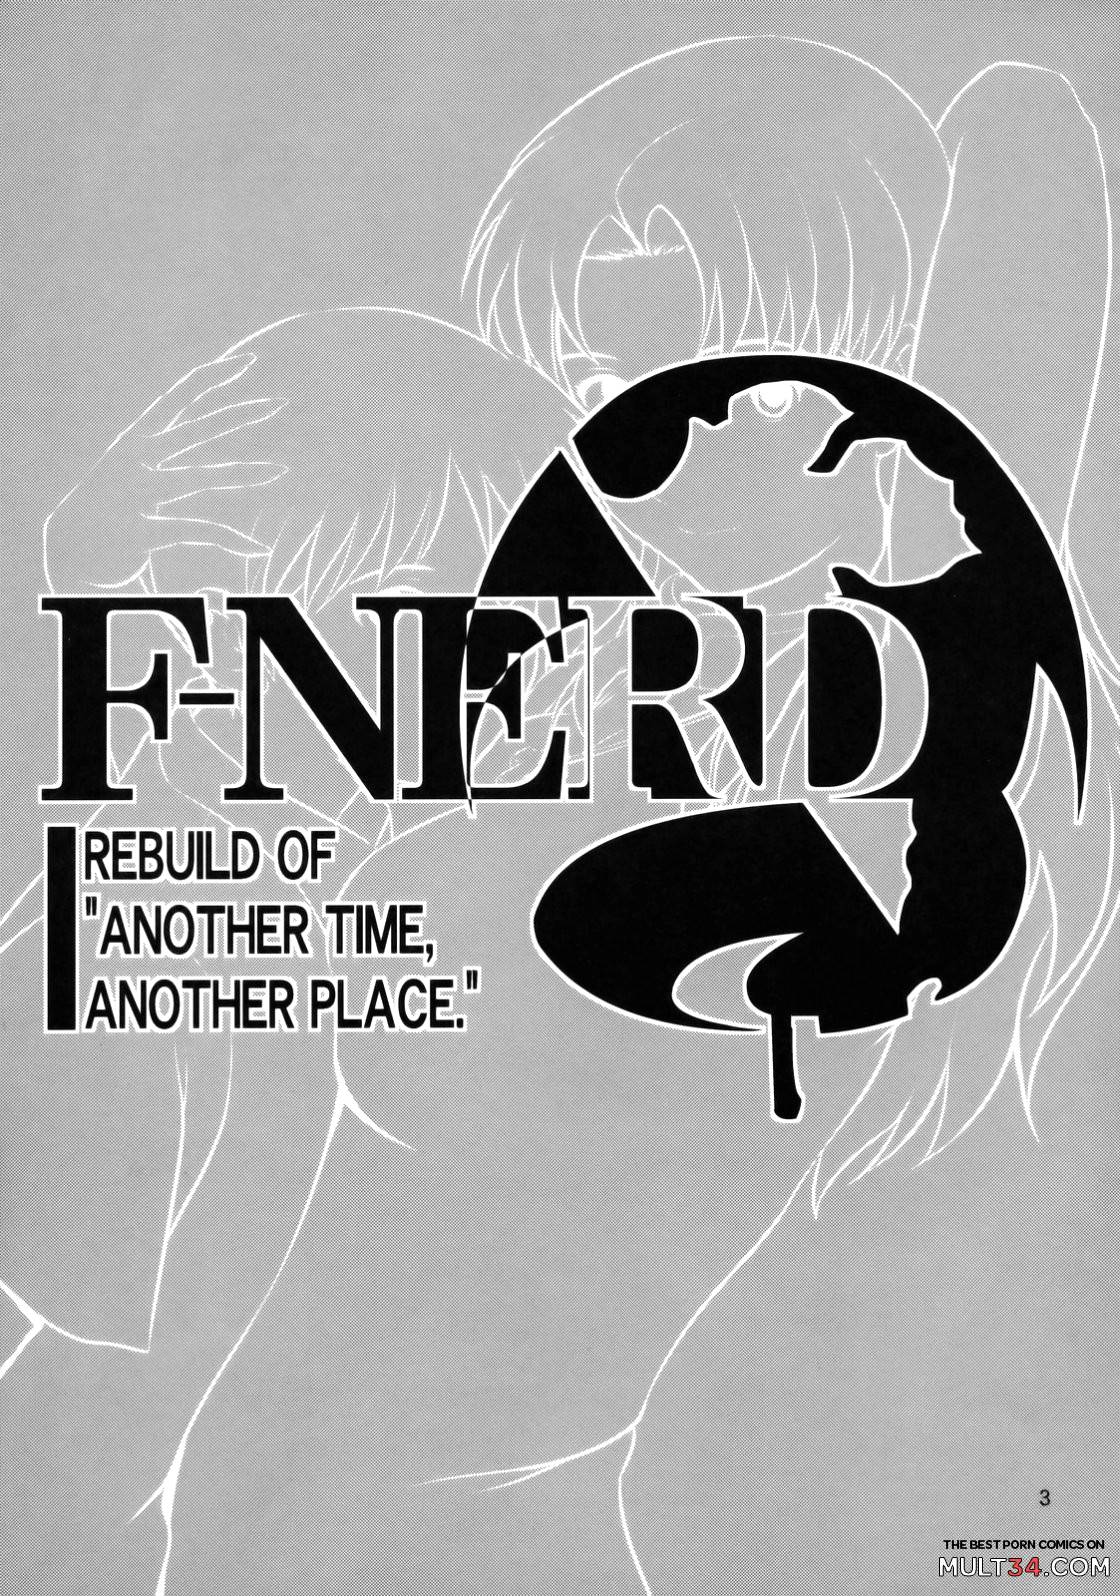 F-NERD - Rebuild of "Another Time, Another Place." page 3